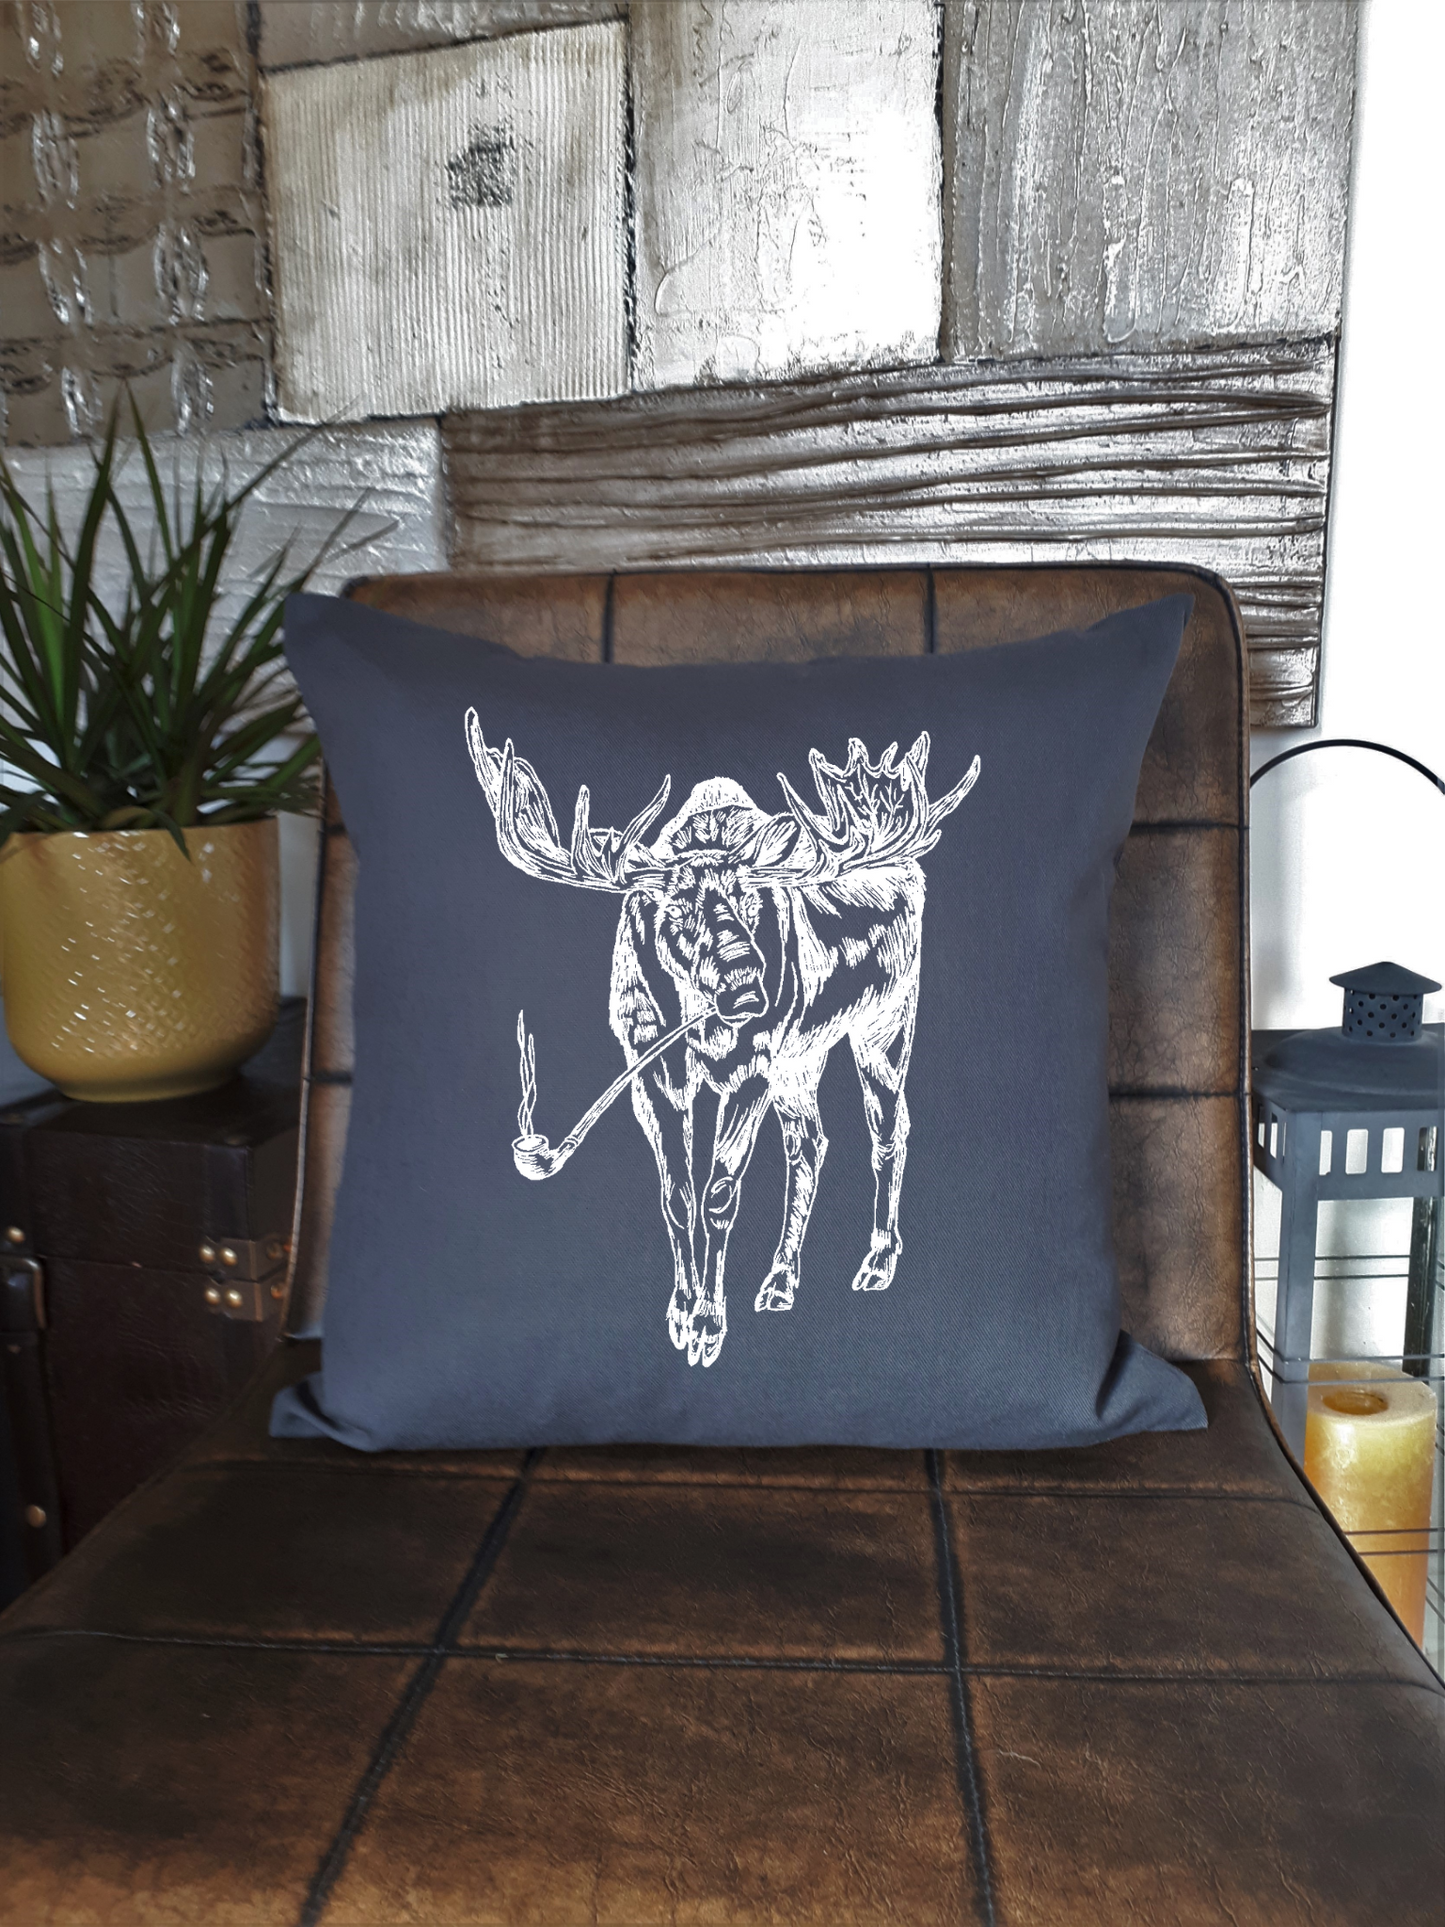 Moose with a Pipe 20 x 20 Cushion Cover